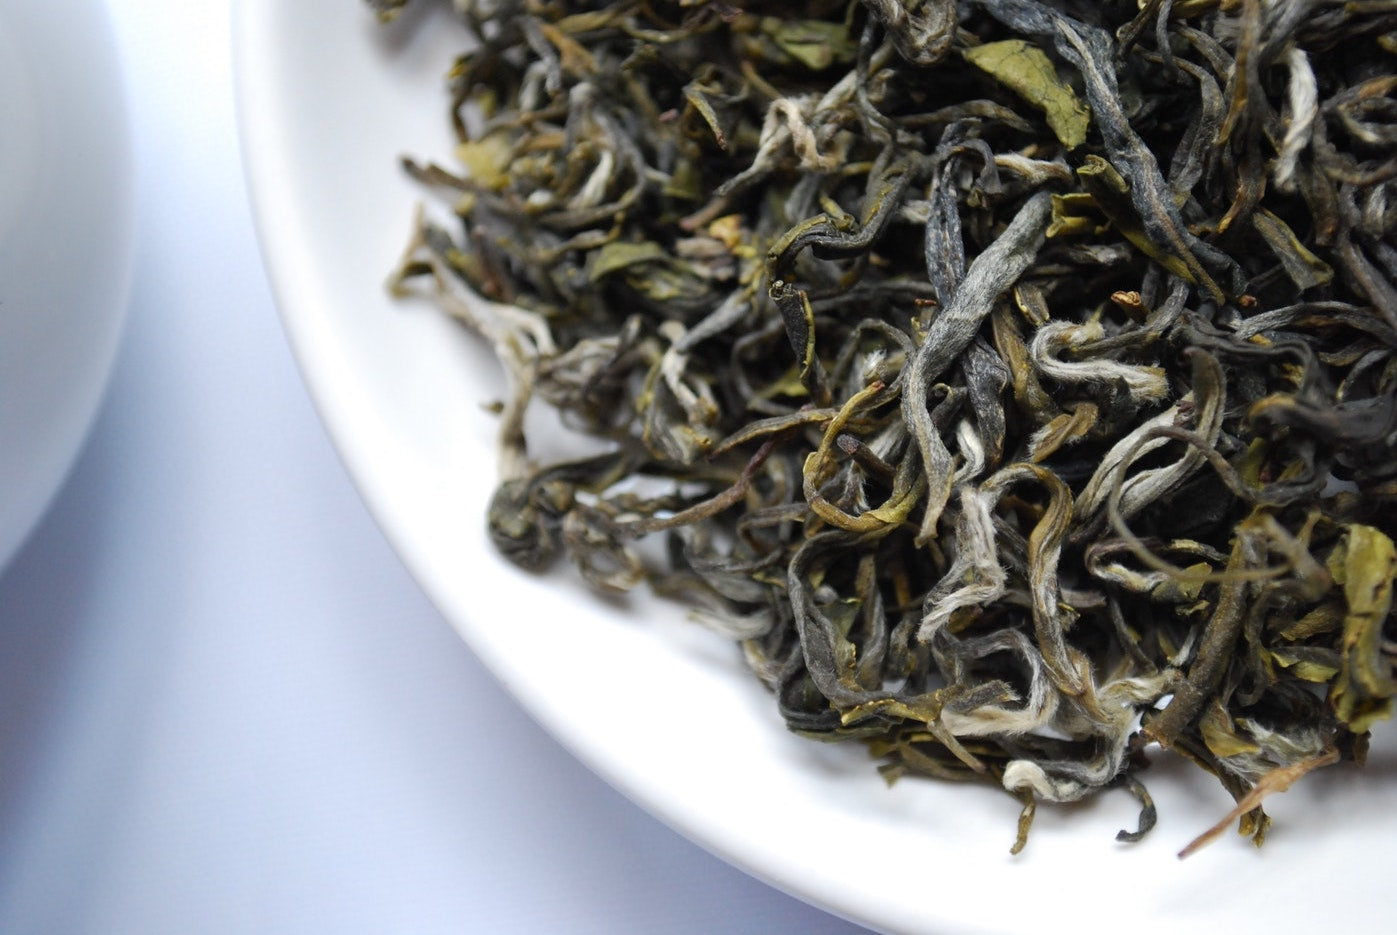 Here's How to Brew the Perfect Cup of Loose Leaf Tea – Golden Tips